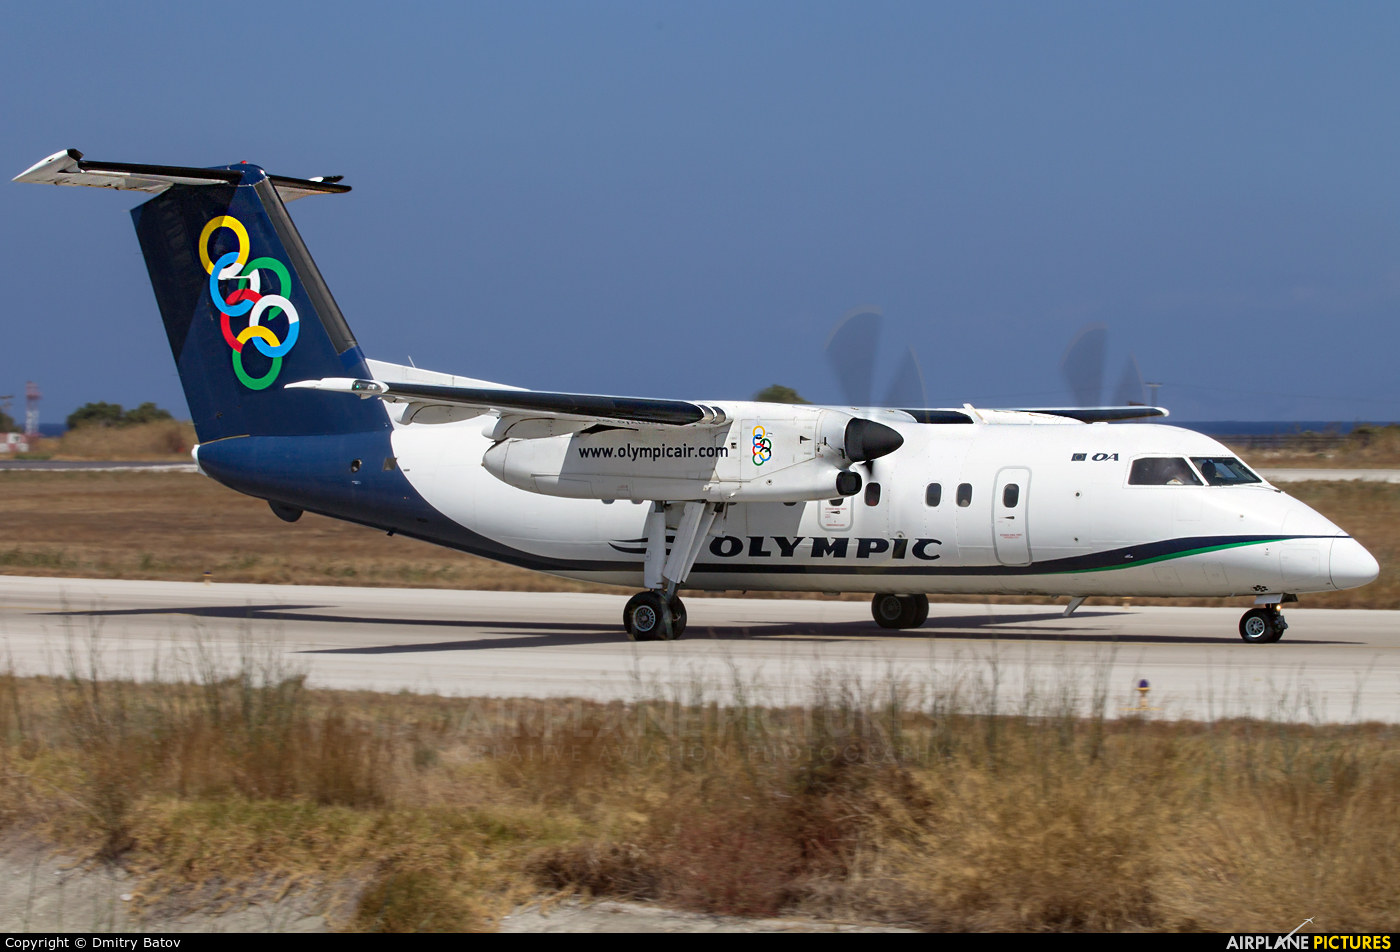 SX-BIO - Olympic Airlines de Havilland Canada DHC-8-100 Dash 8 at Rhodes -  Diagoras | Photo ID 438609 | Airplane-Pictures.net